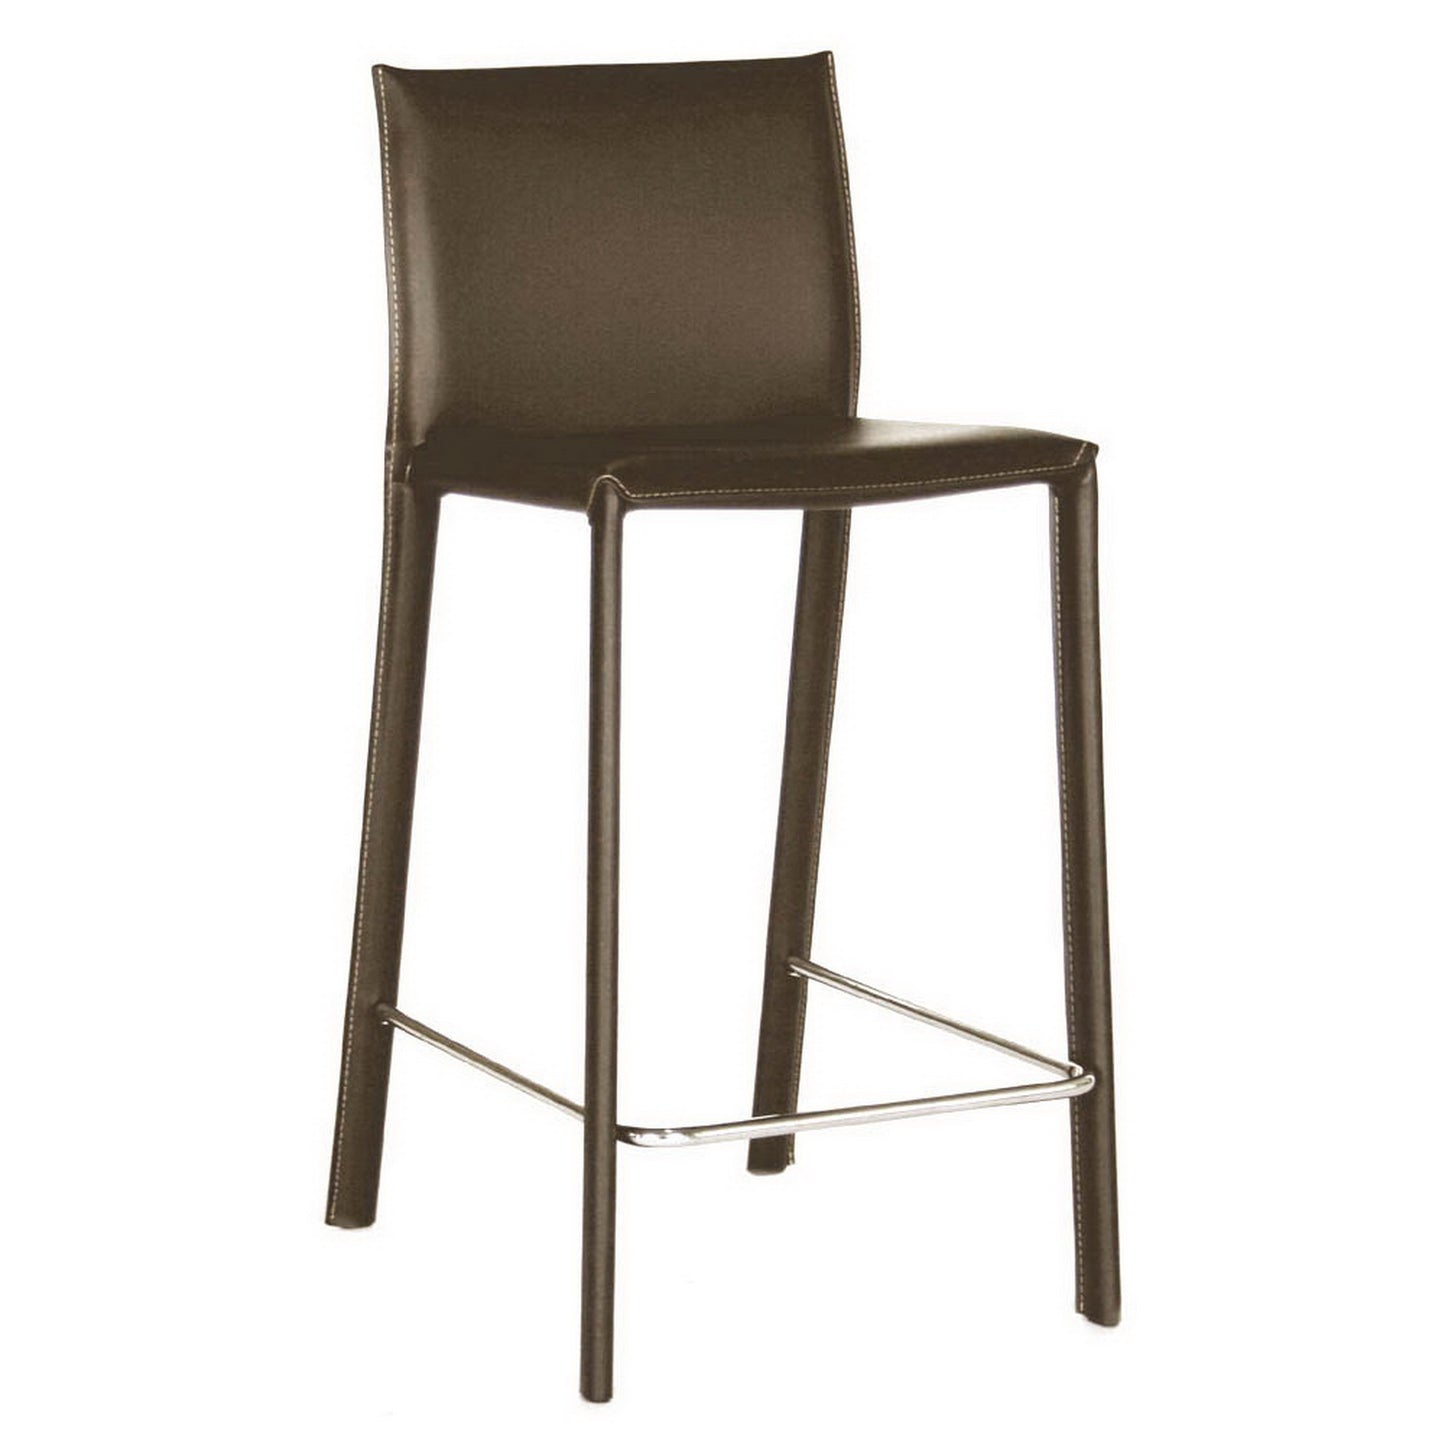 Modern 2 Stainless Steel Counter Height Stool in Brown Bonded Leather